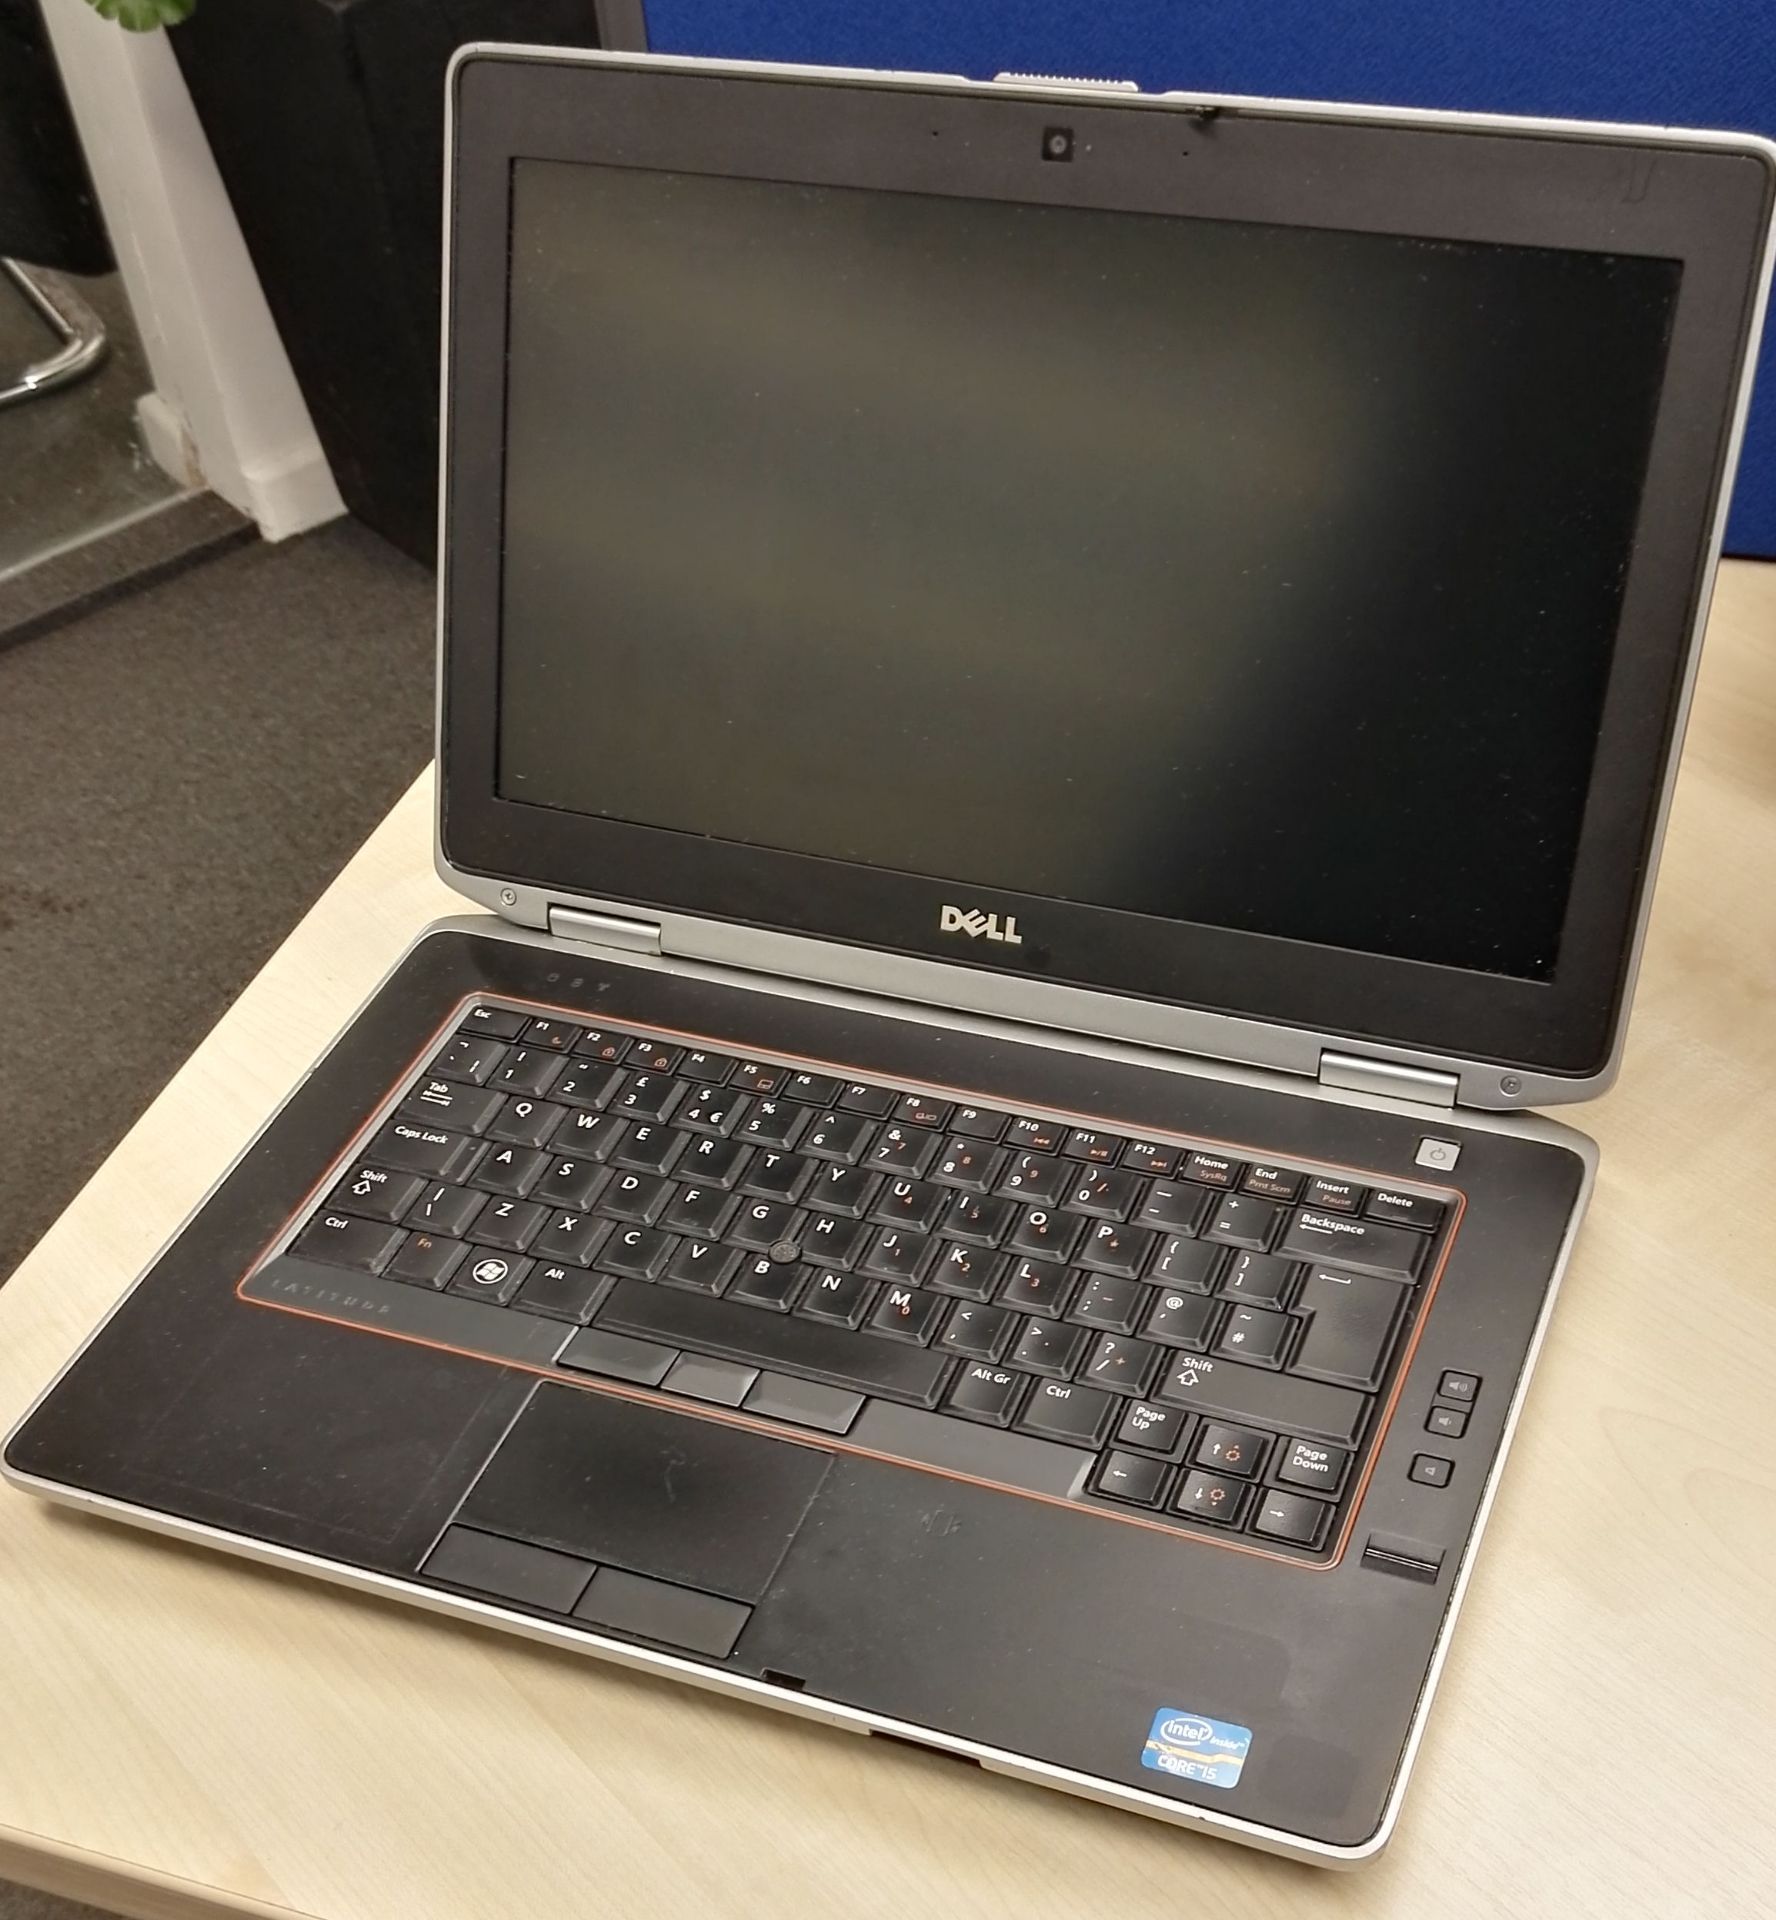 1 x Dell E6420 Latitude Laptop Computer - Features 6gb RAM, 320gb Hard Drive, Intel i5 2.5GHz - Image 4 of 19